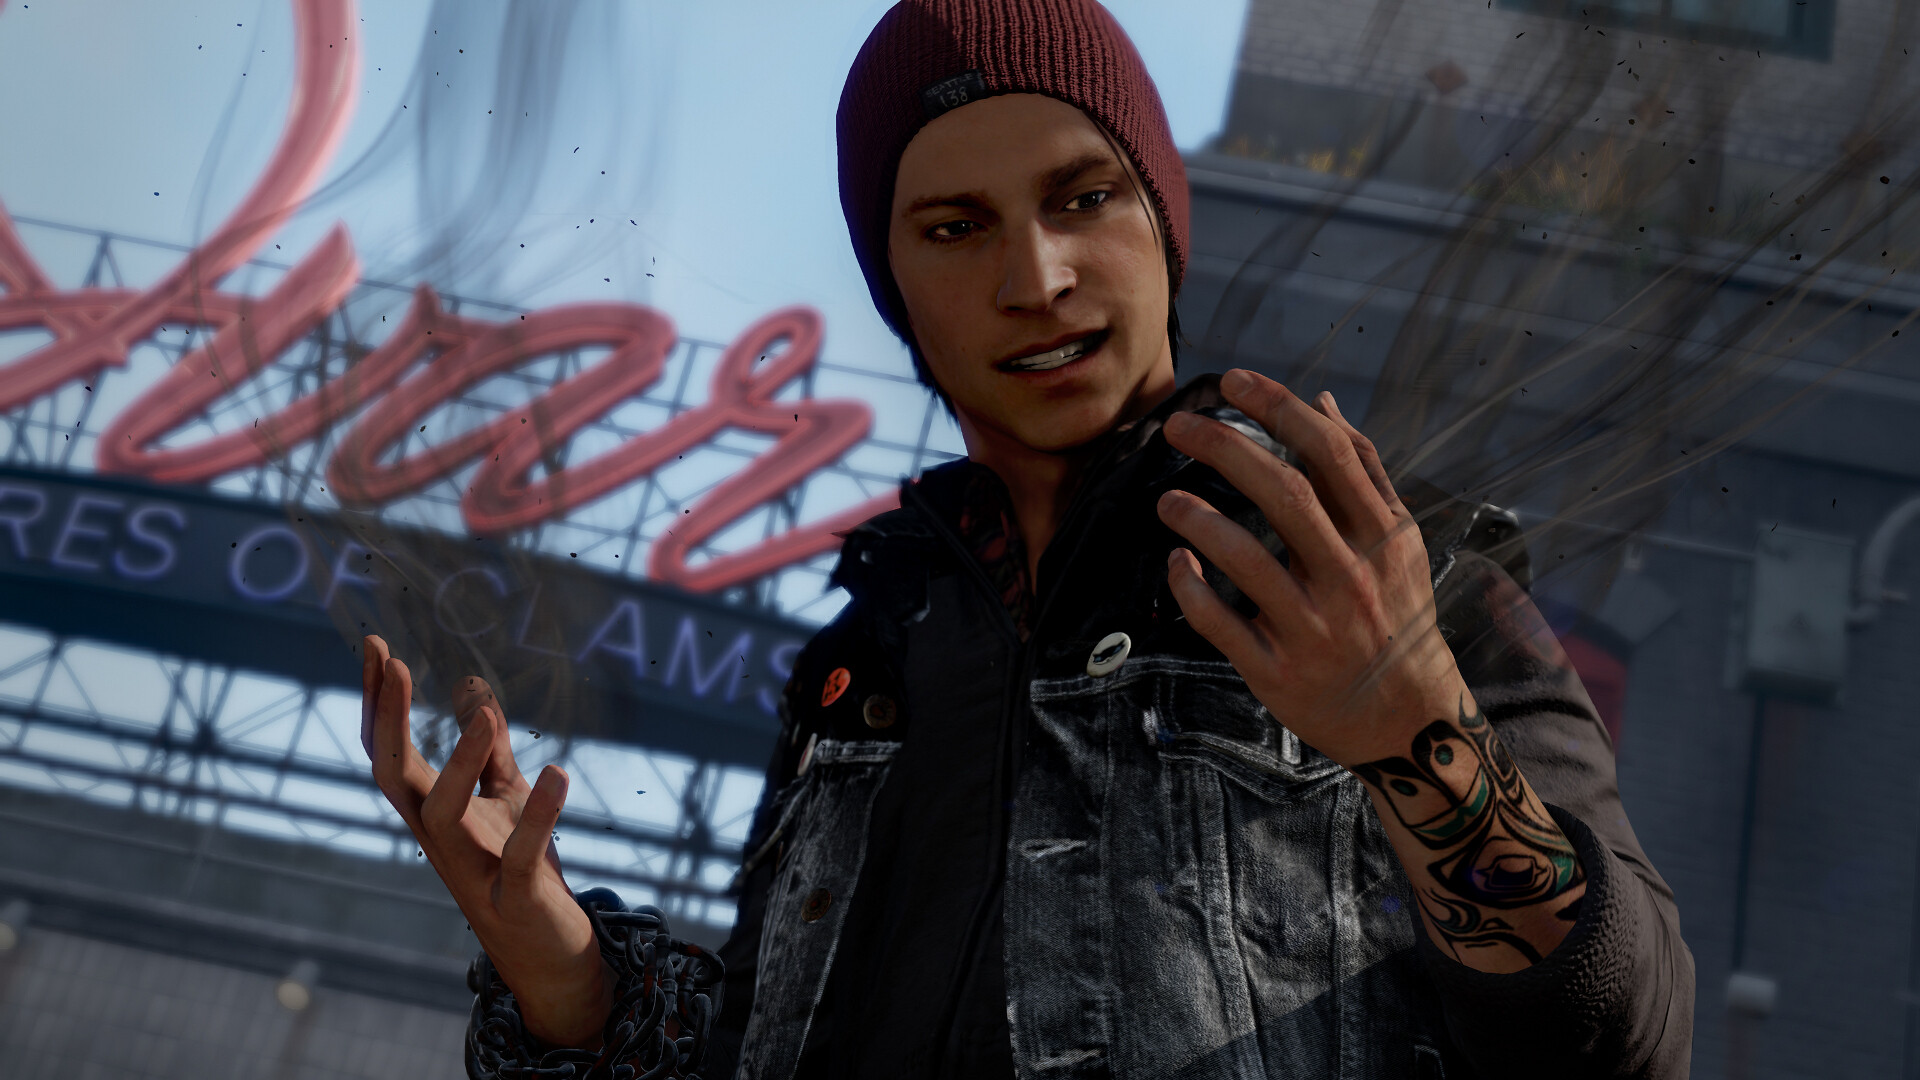 inFAMOUS: Delsin has the unique Conduit ability of Power Absorption, Game character. 1920x1080 Full HD Wallpaper.